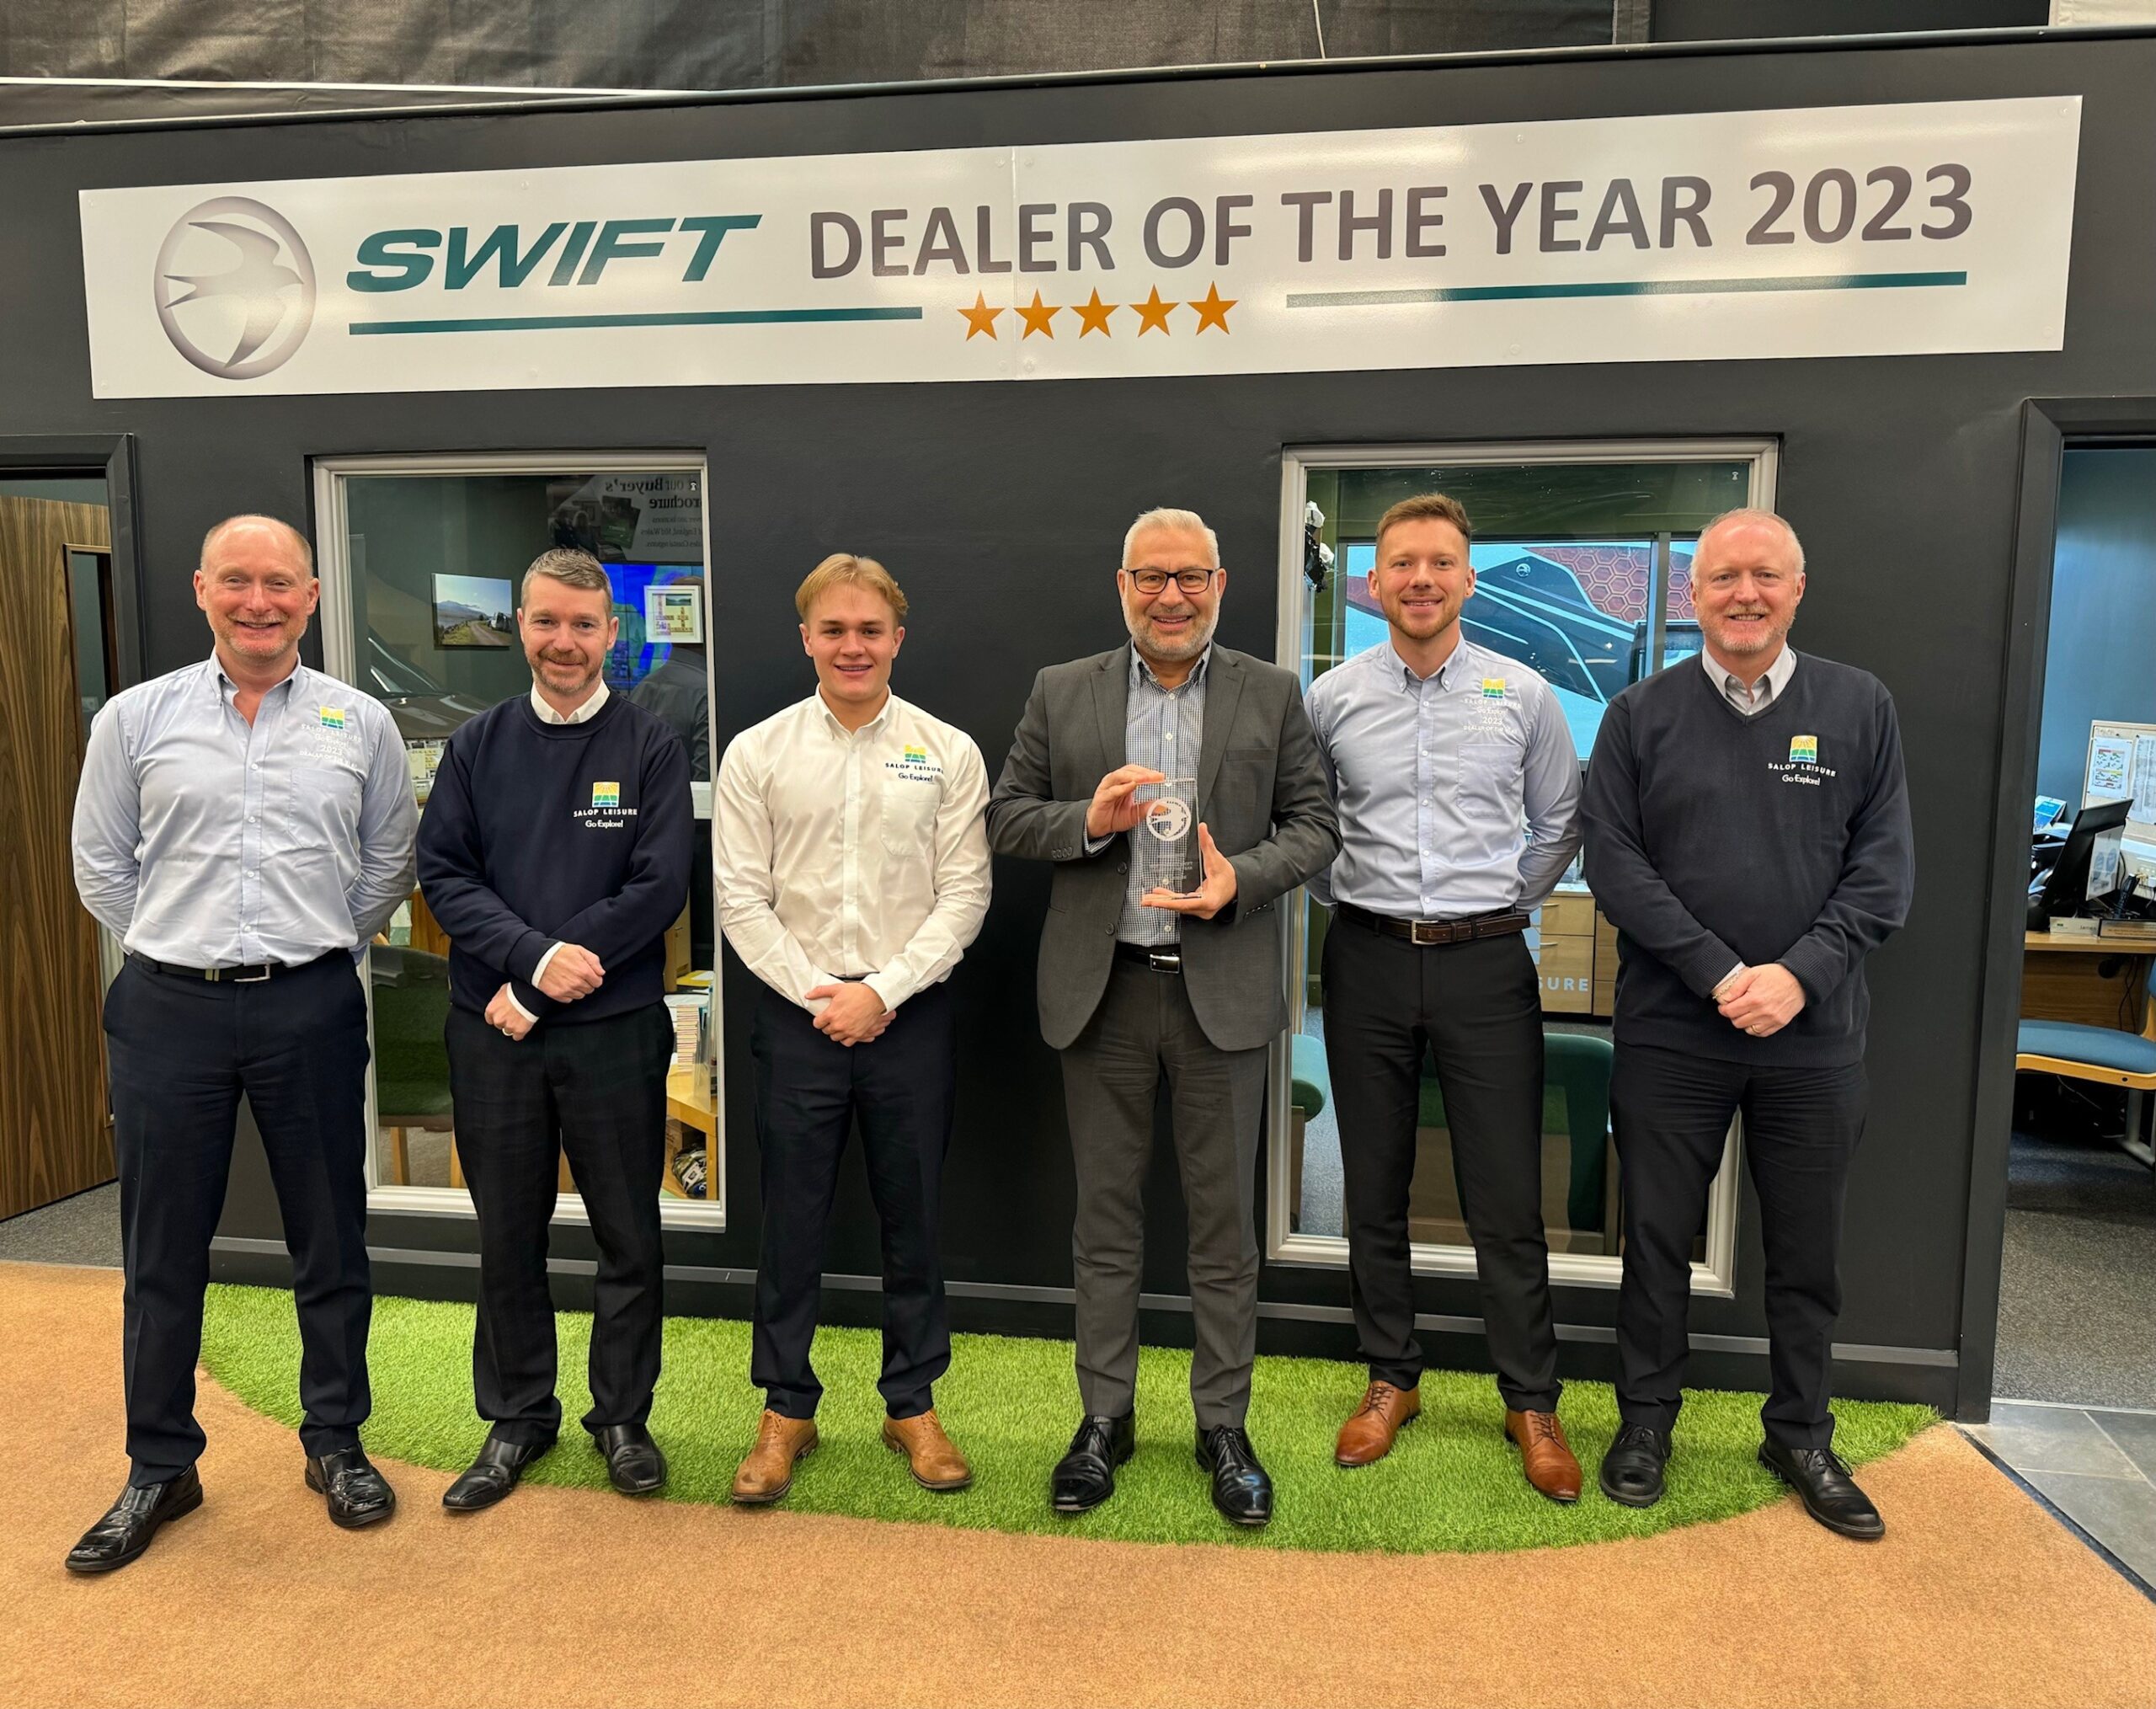 Salop Leisure named overall best dealership in Swift Group’s annual awards